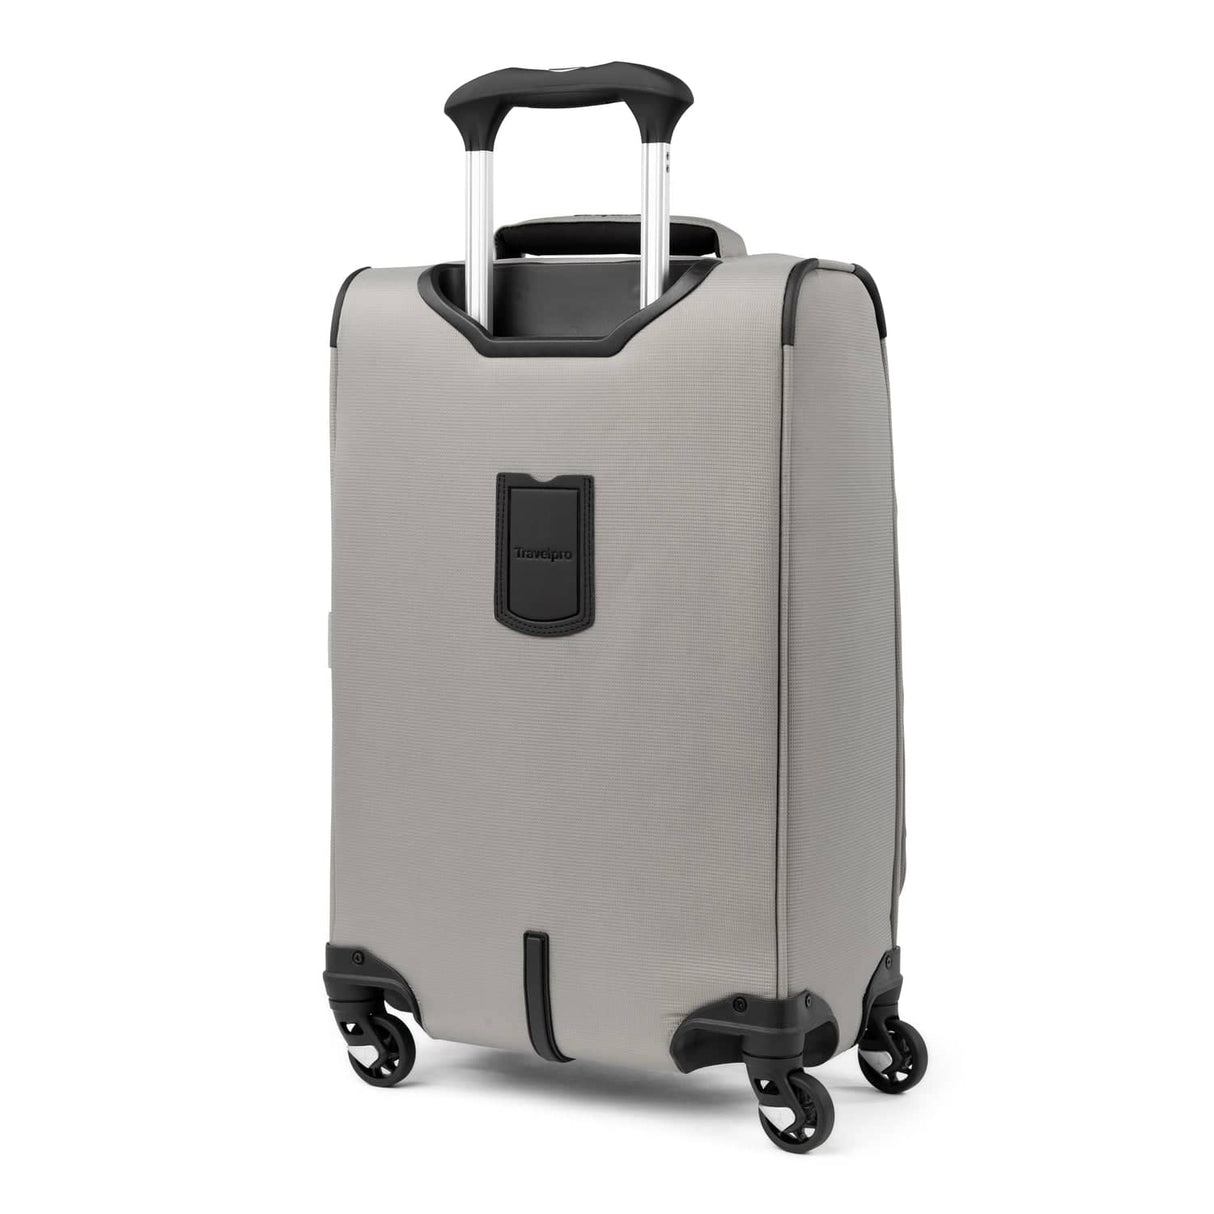 Travelpro Maxlite 5 21" Carry-On Expandable Spinner , , 401176135_back-1500x1500-f3a2c67_1024x1024_2x_8f68171e-c3f2-4116-875c-447a6201dfba